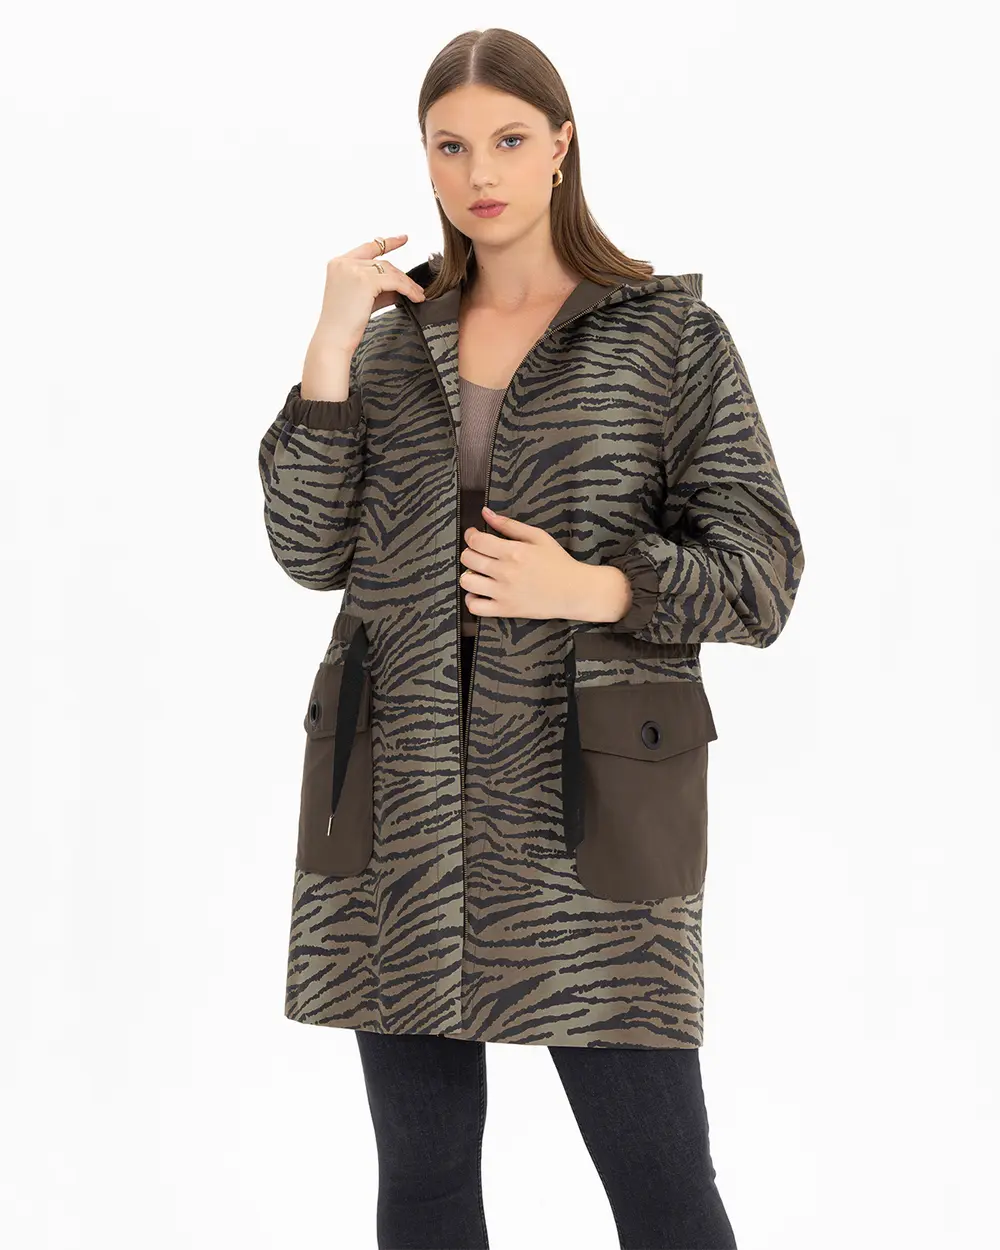 Plus Size Zebra Patterned Hooded Trench Coat